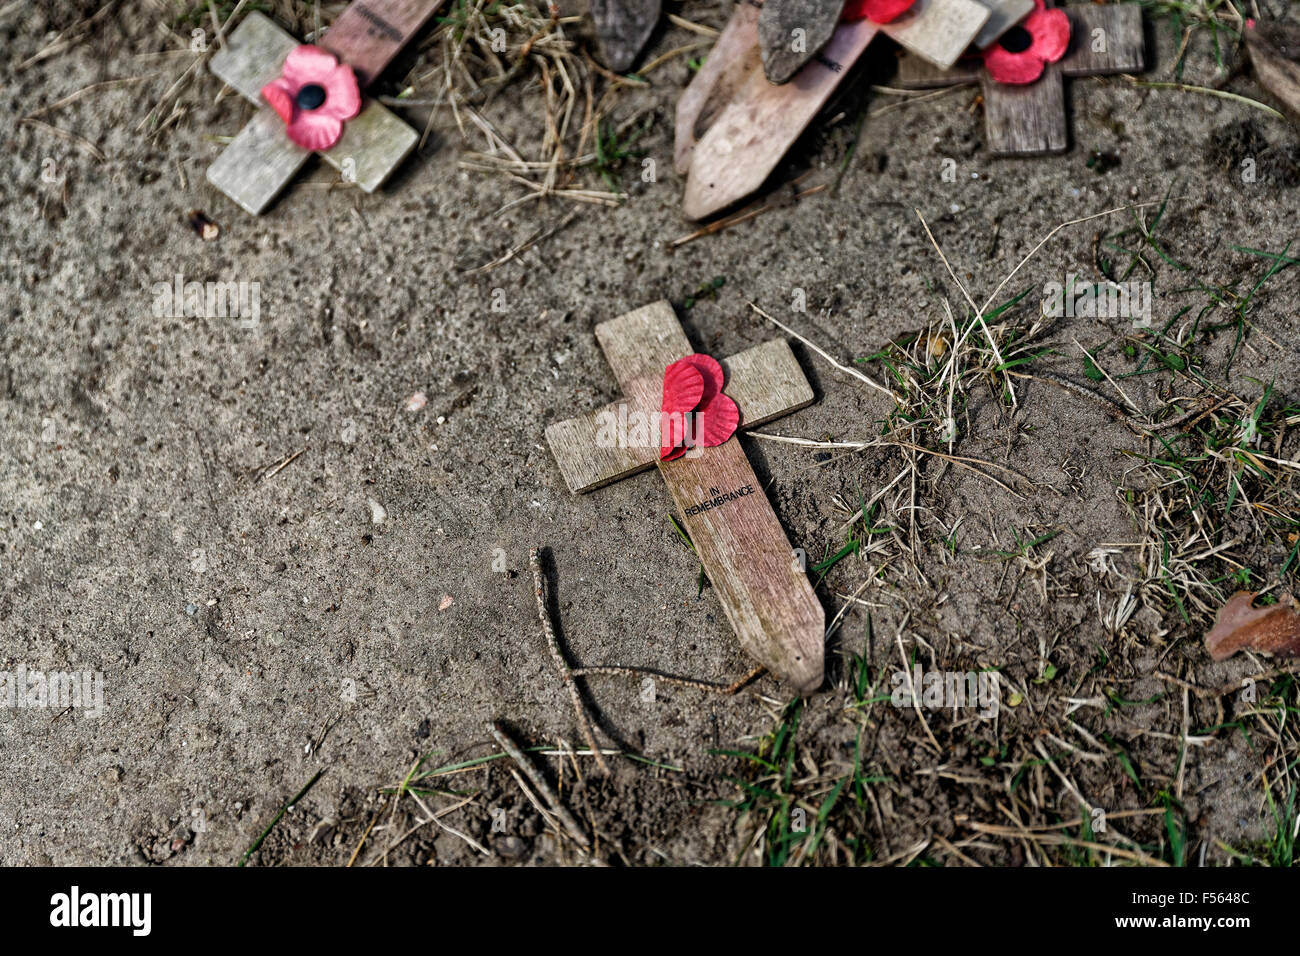 14.04.2015, Oranienburg, Brandenburg, Germany - Memorial on the site of the former Nazi concentration camp Sachsenhausen in Oranienburg near Berlin district of the same name. Pictured remembrance crosses for British prisoners of war who came in Sachsenhausen killed. EJH150414D240CAROEX.JPG - NOT for SALE in G E R M A N Y, A U S T R I A, S W I T Z E R L A N D [MODEL RELEASE: NOT APPLICABLE, PROPERTY RELEASE: NO (c) caro photo agency / Heinrich, http://www.caro-images.pl, info@carofoto.pl - In case of using the picture for non-journalistic purposes, please contact the agency - the picture is sub Stock Photo